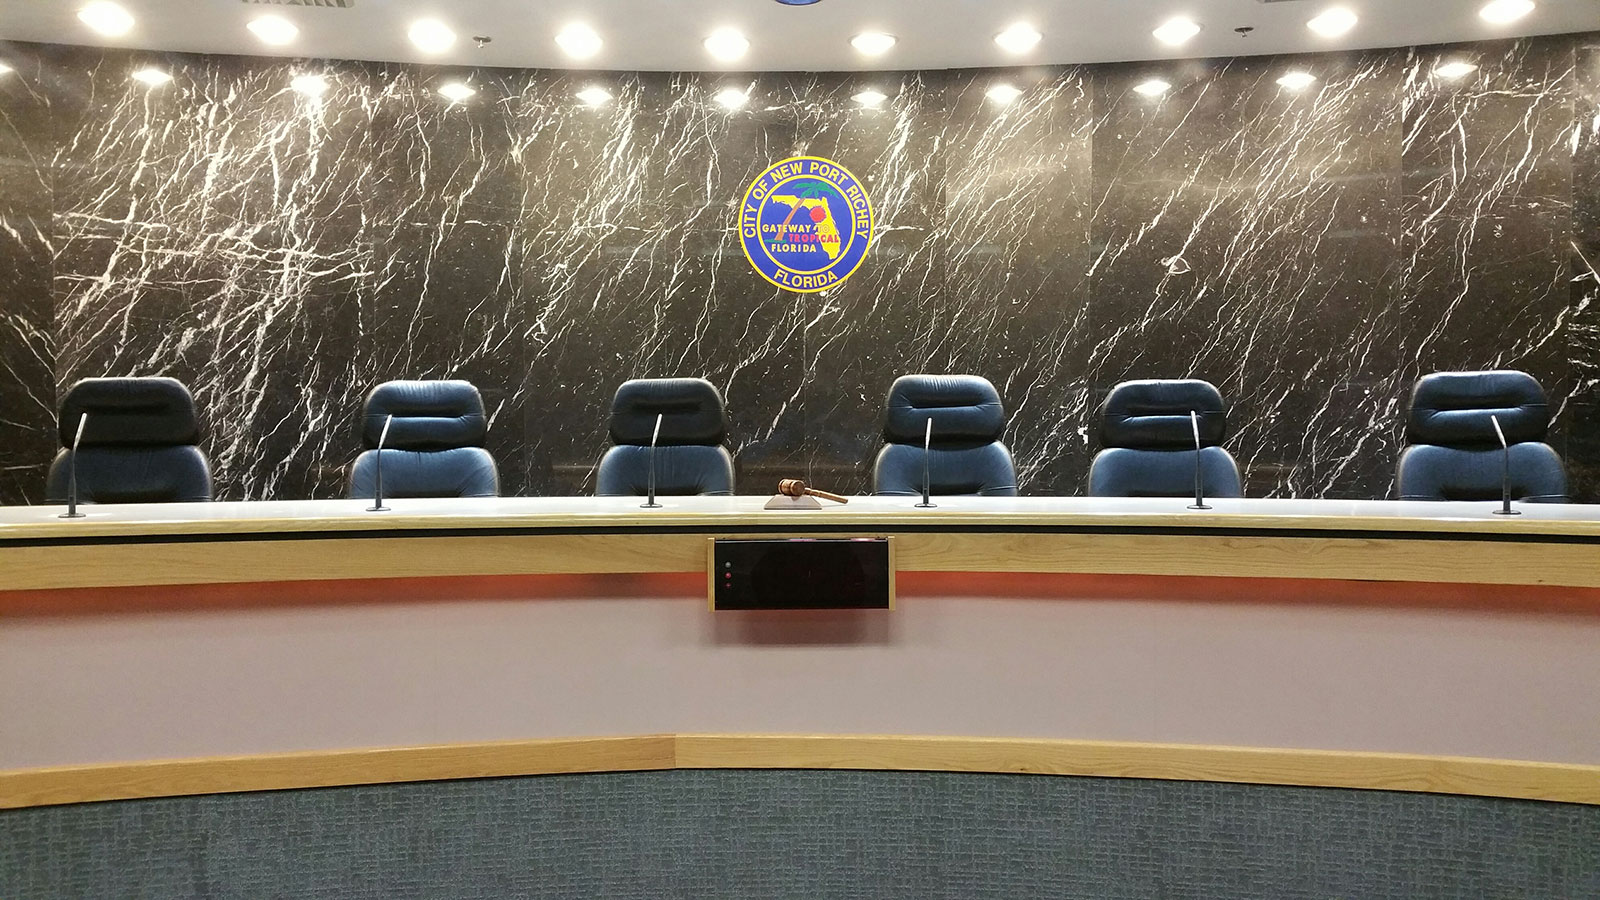 A dais with microphones mounted in it, chairs are set up behind it. The City of New Port Richey seal is visible behind them